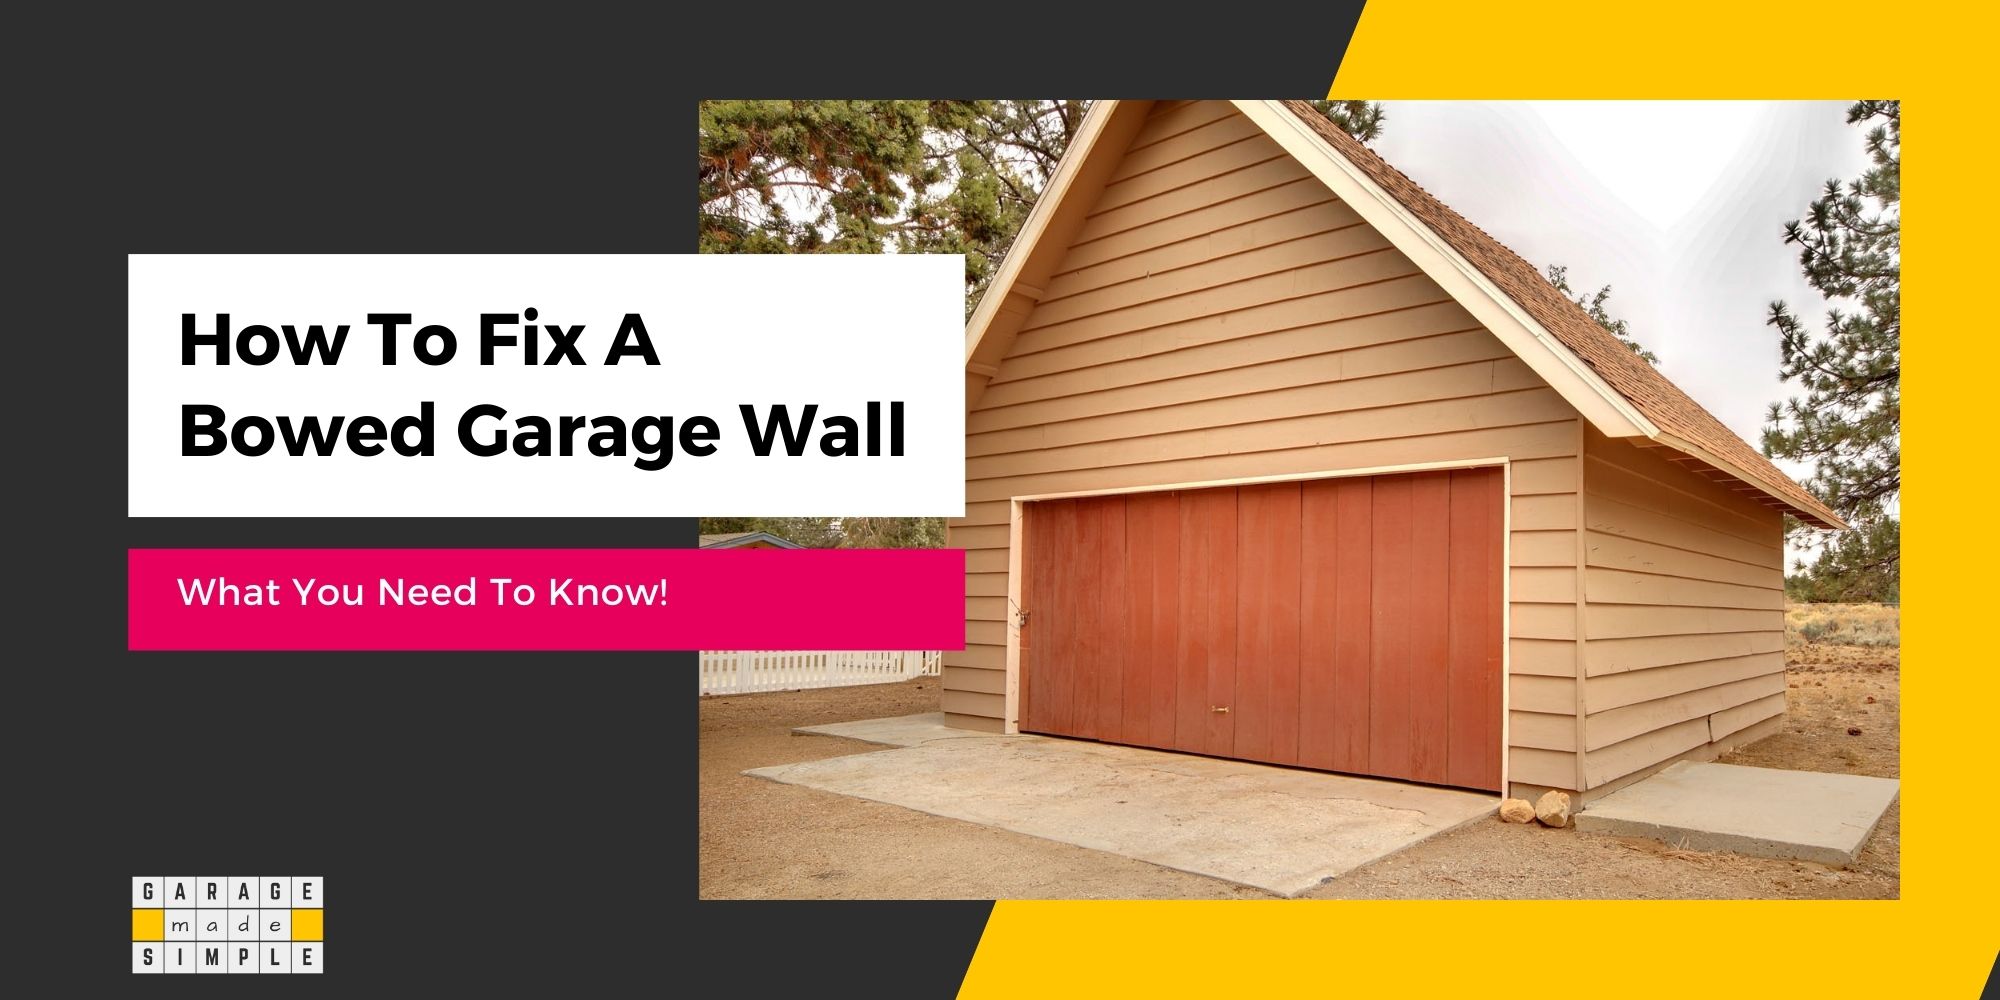 What You Need To Know About How To Fix A Bowed Garage Wall